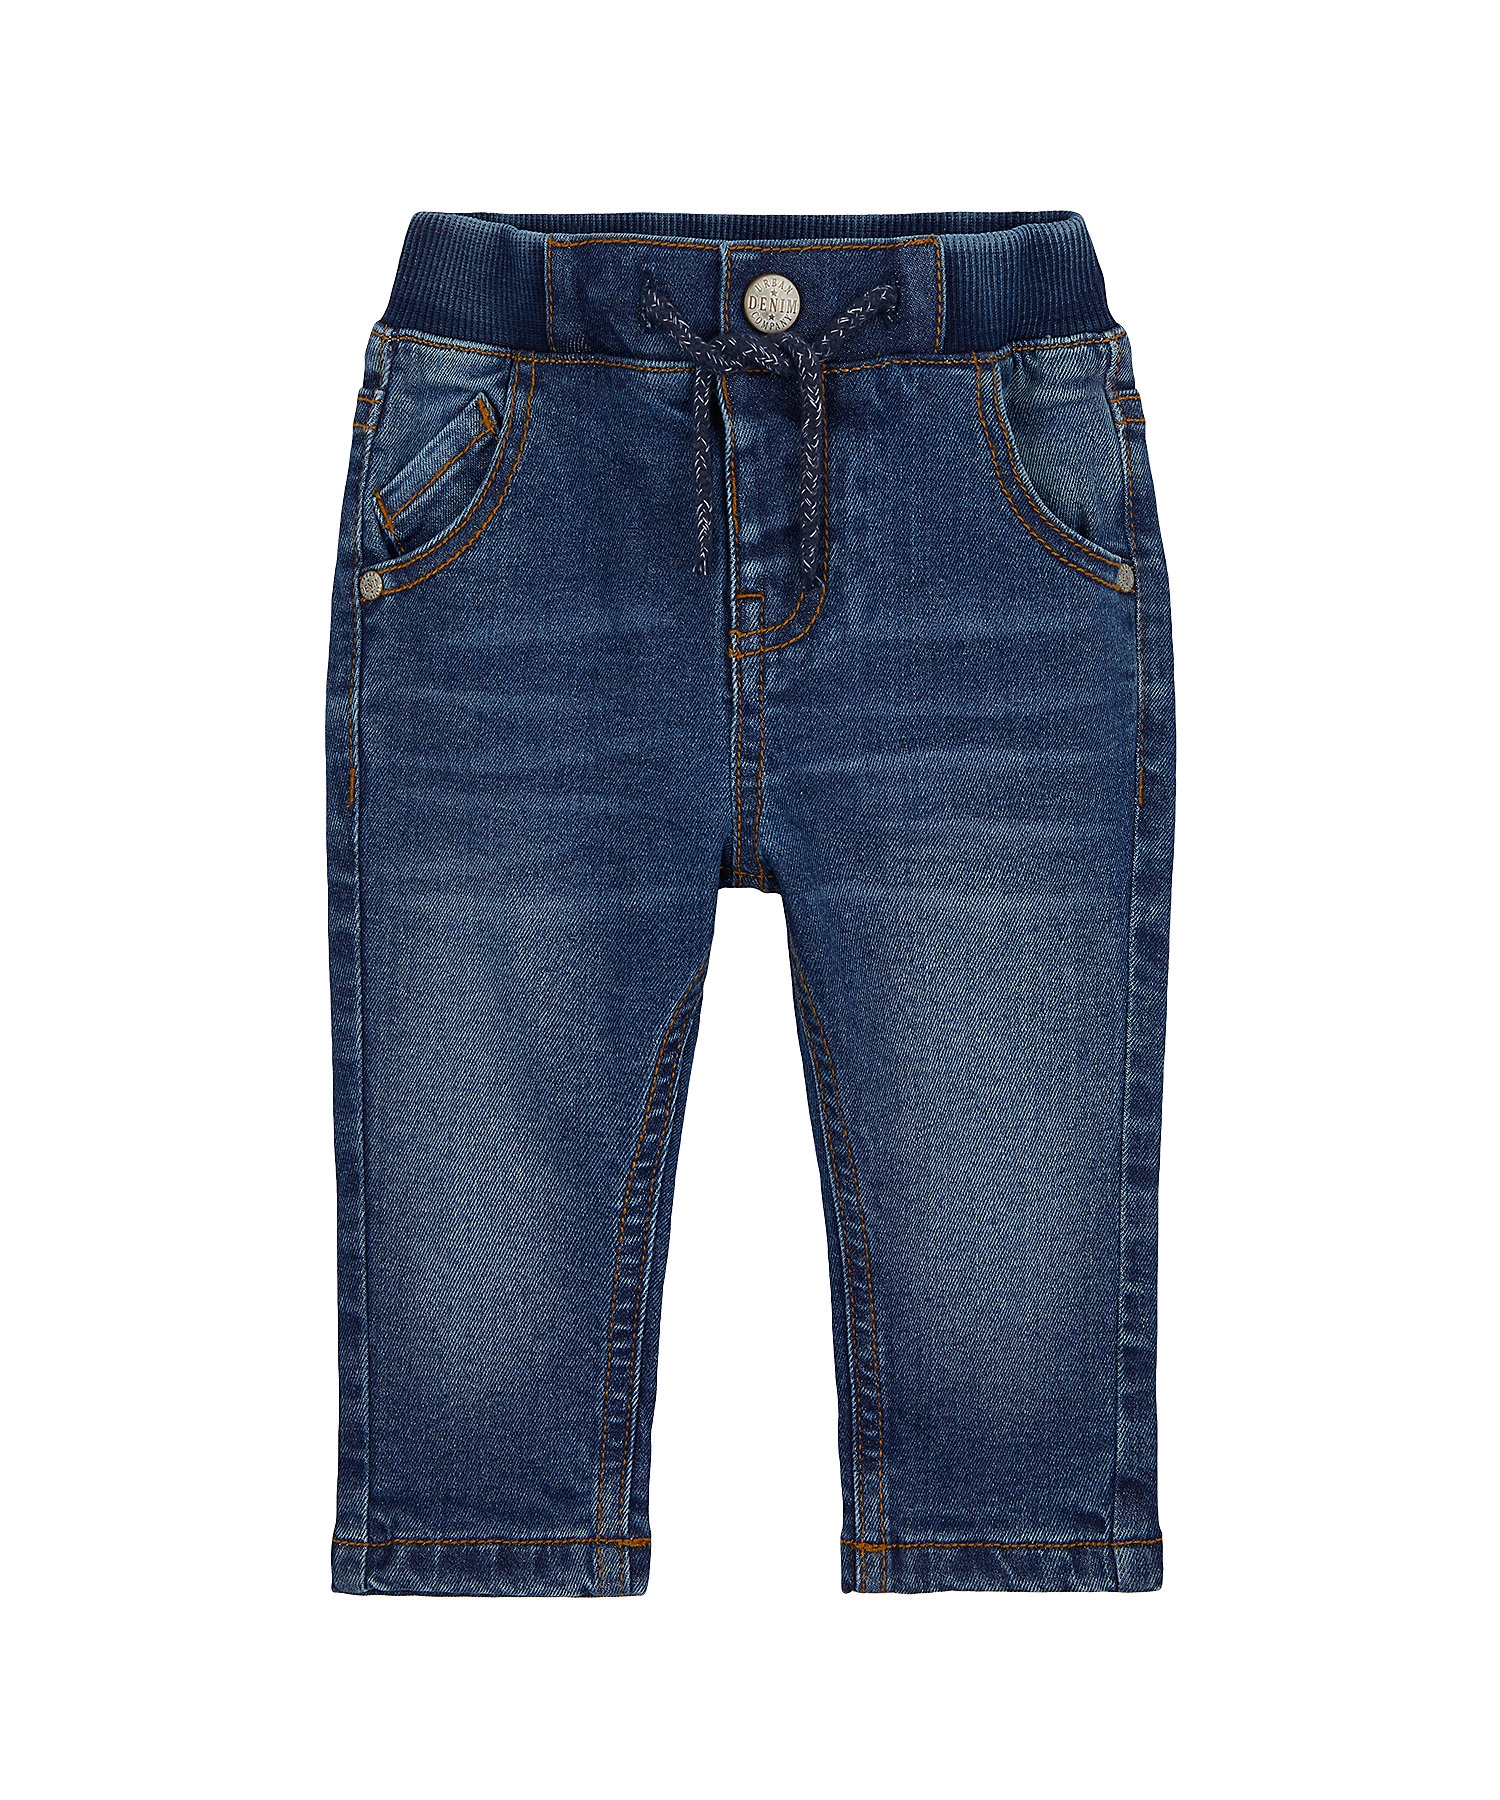 Mothercare | Boys Mid-Wash Jeans Fleece Lined - Blue 0